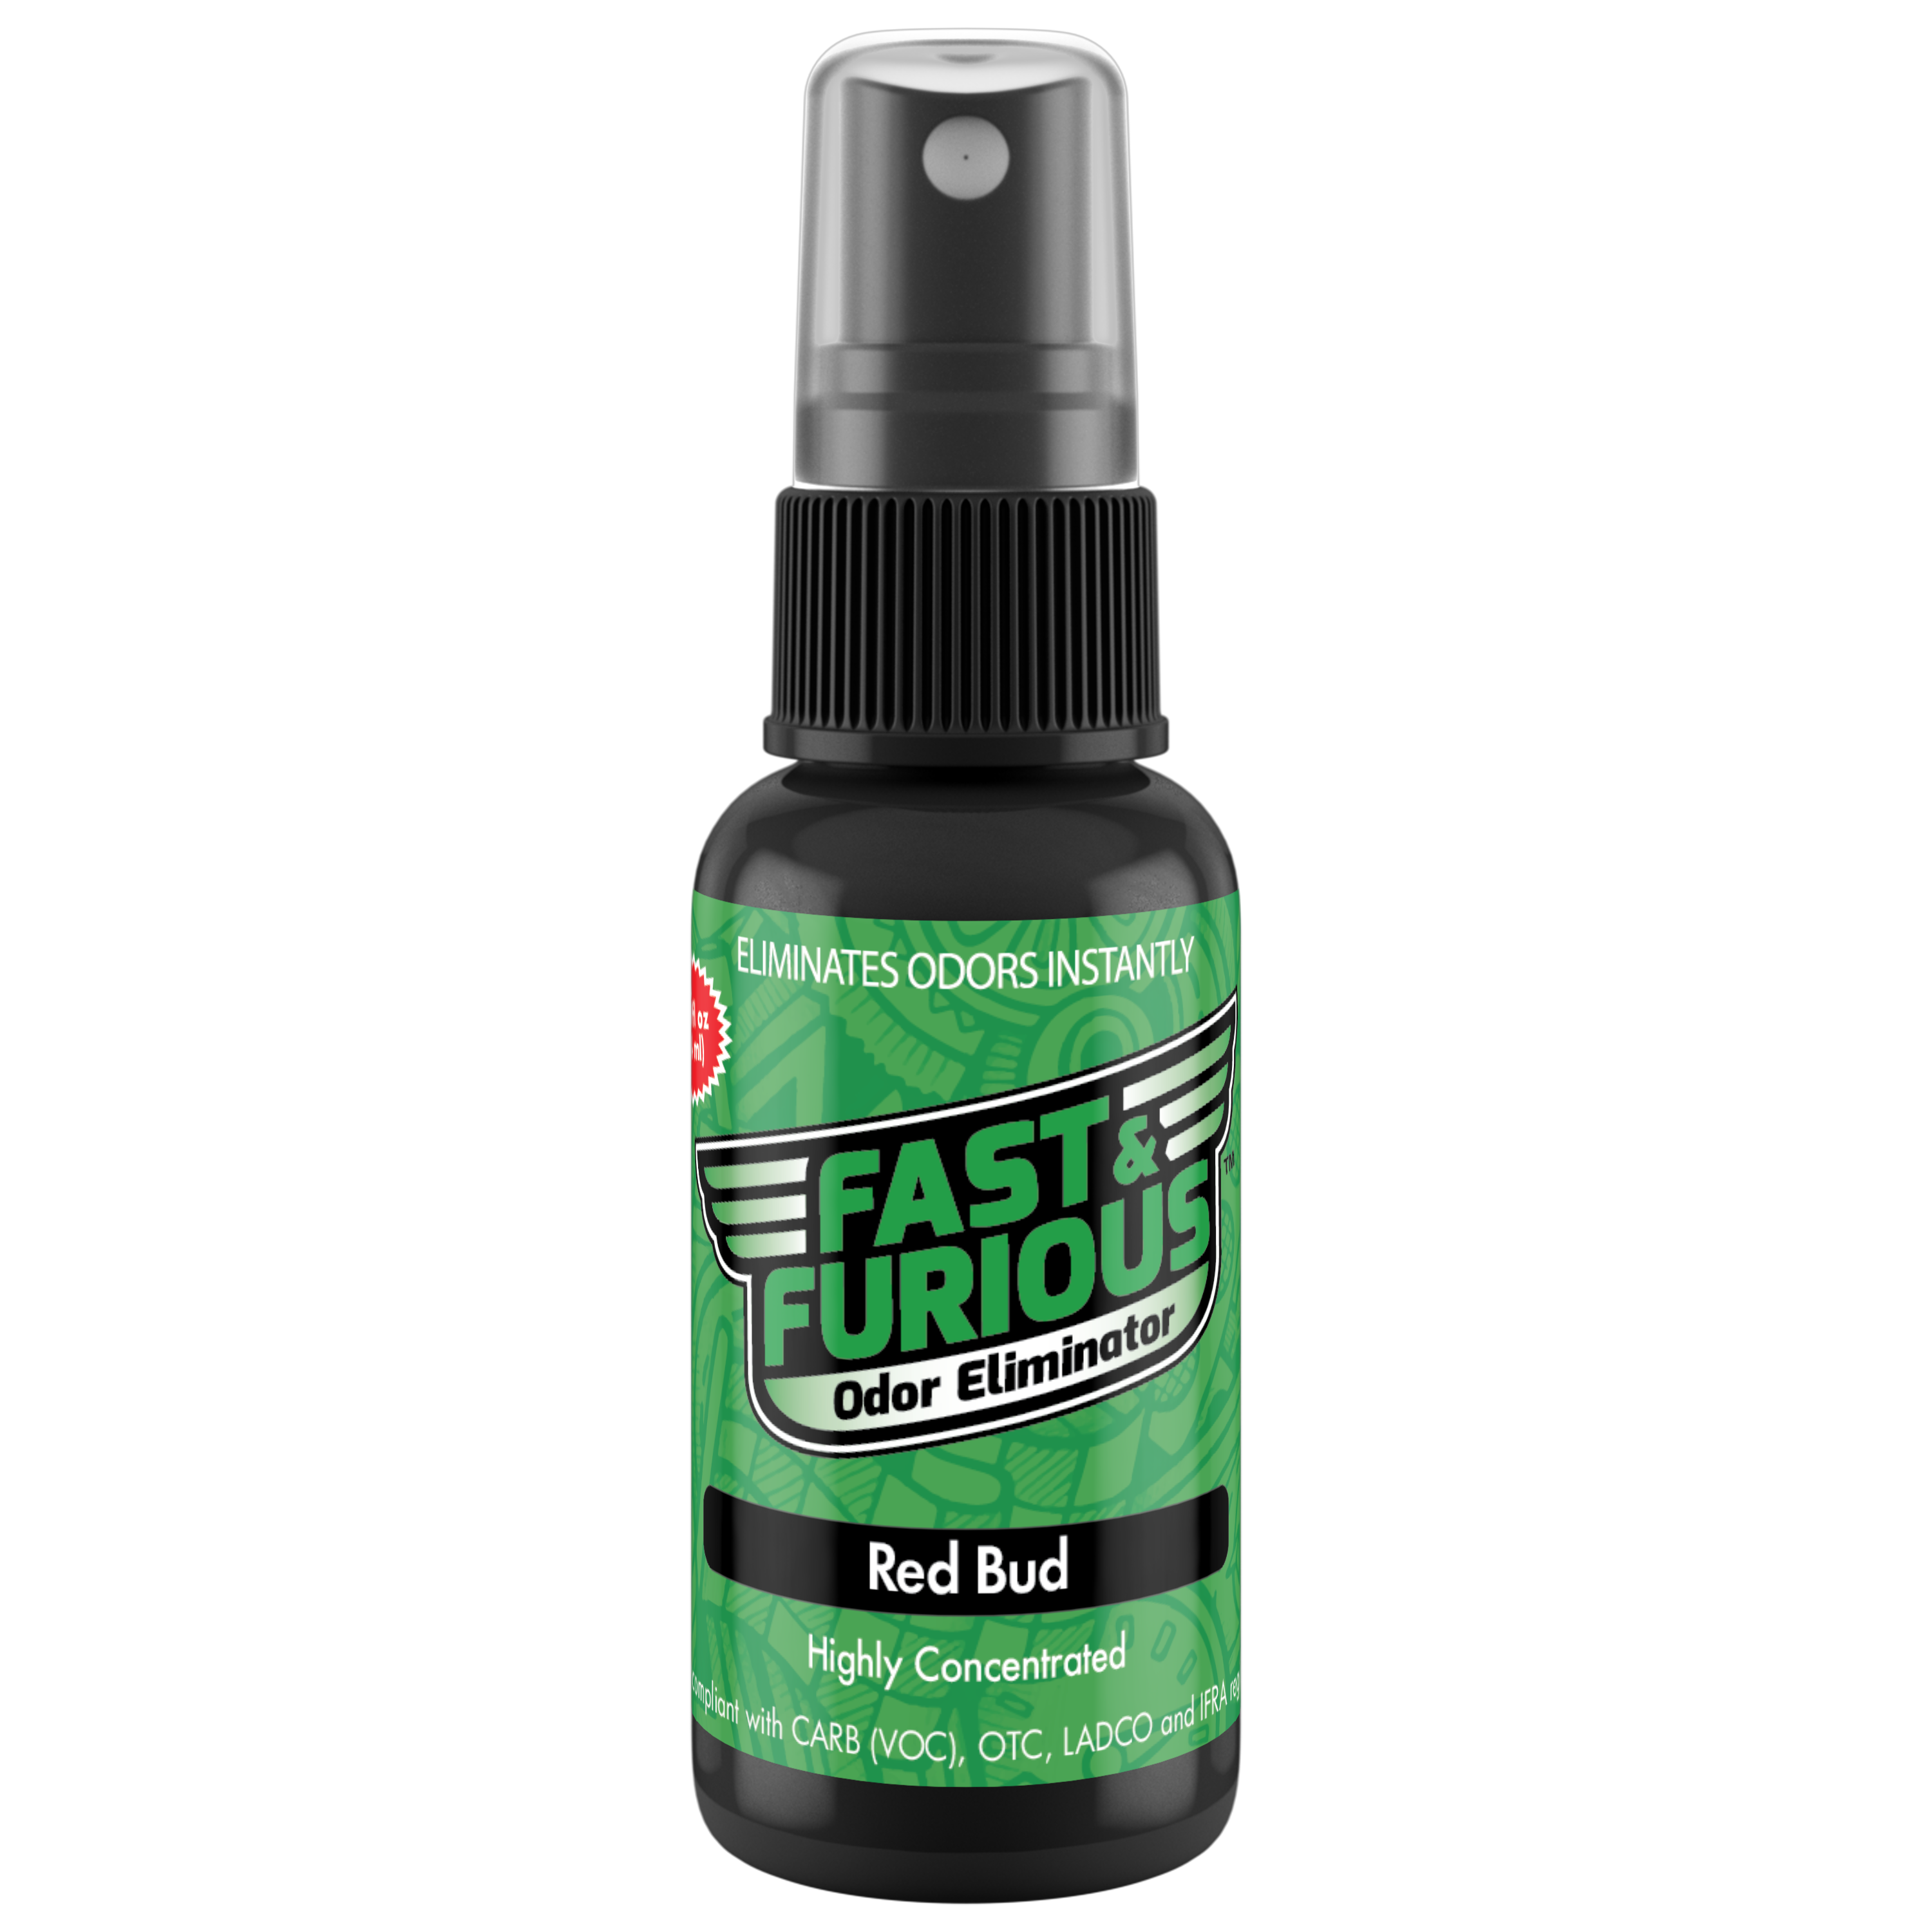 Fast and Furious Odor Eliminator - Red Bud Scent